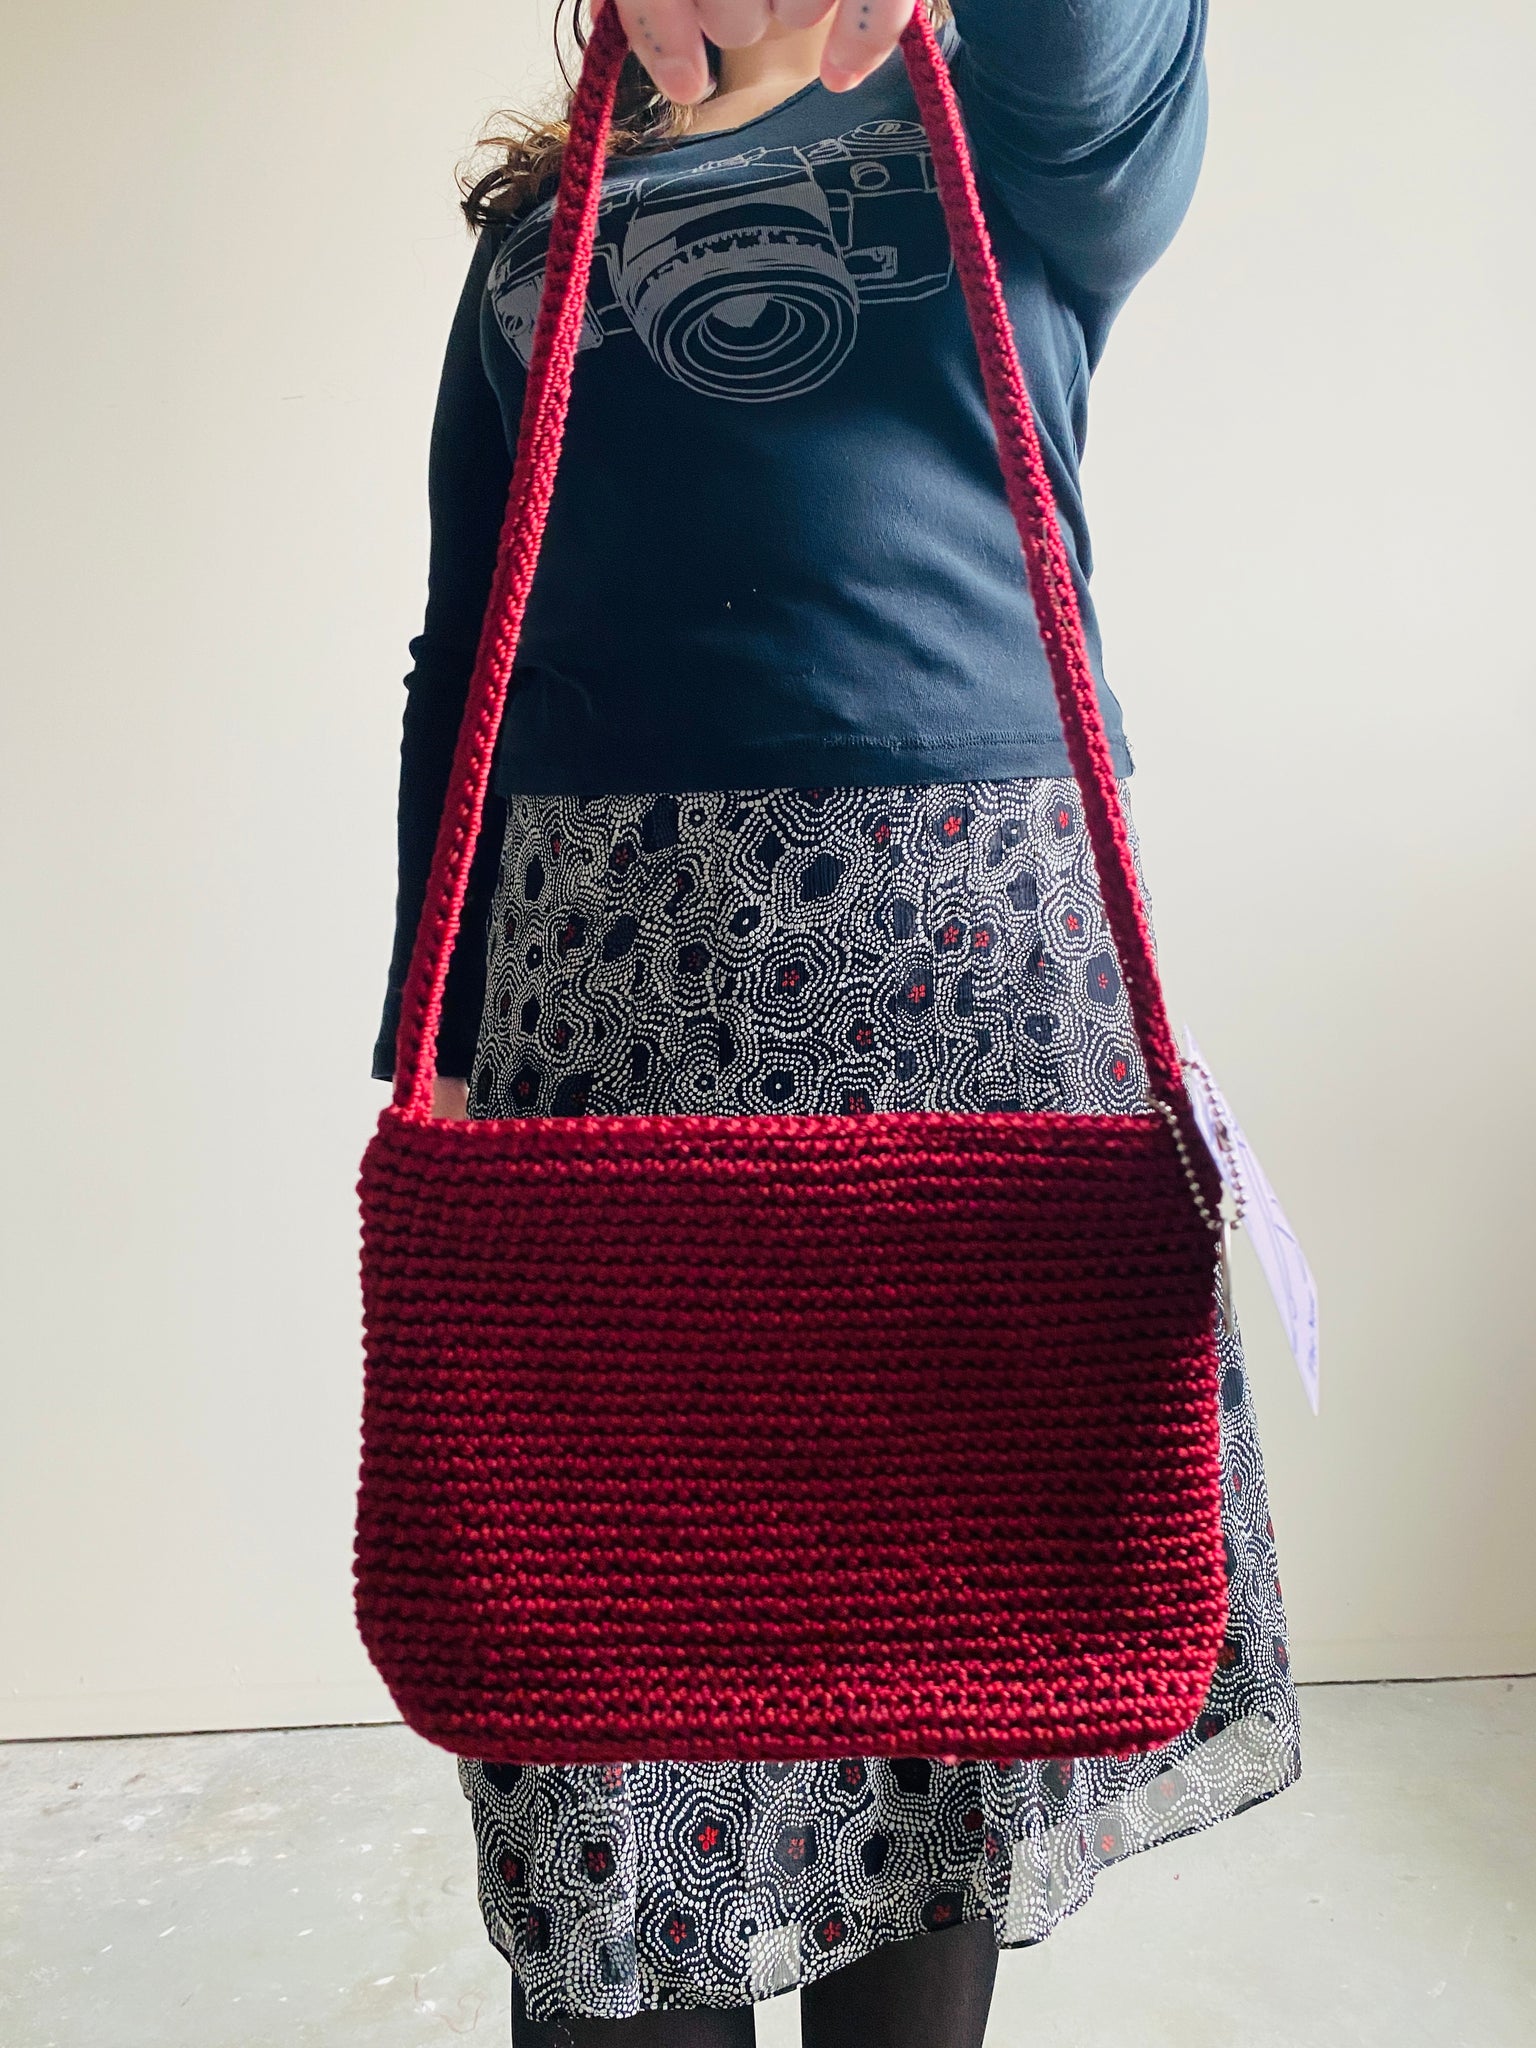 The Sak Small Red Woven Purse